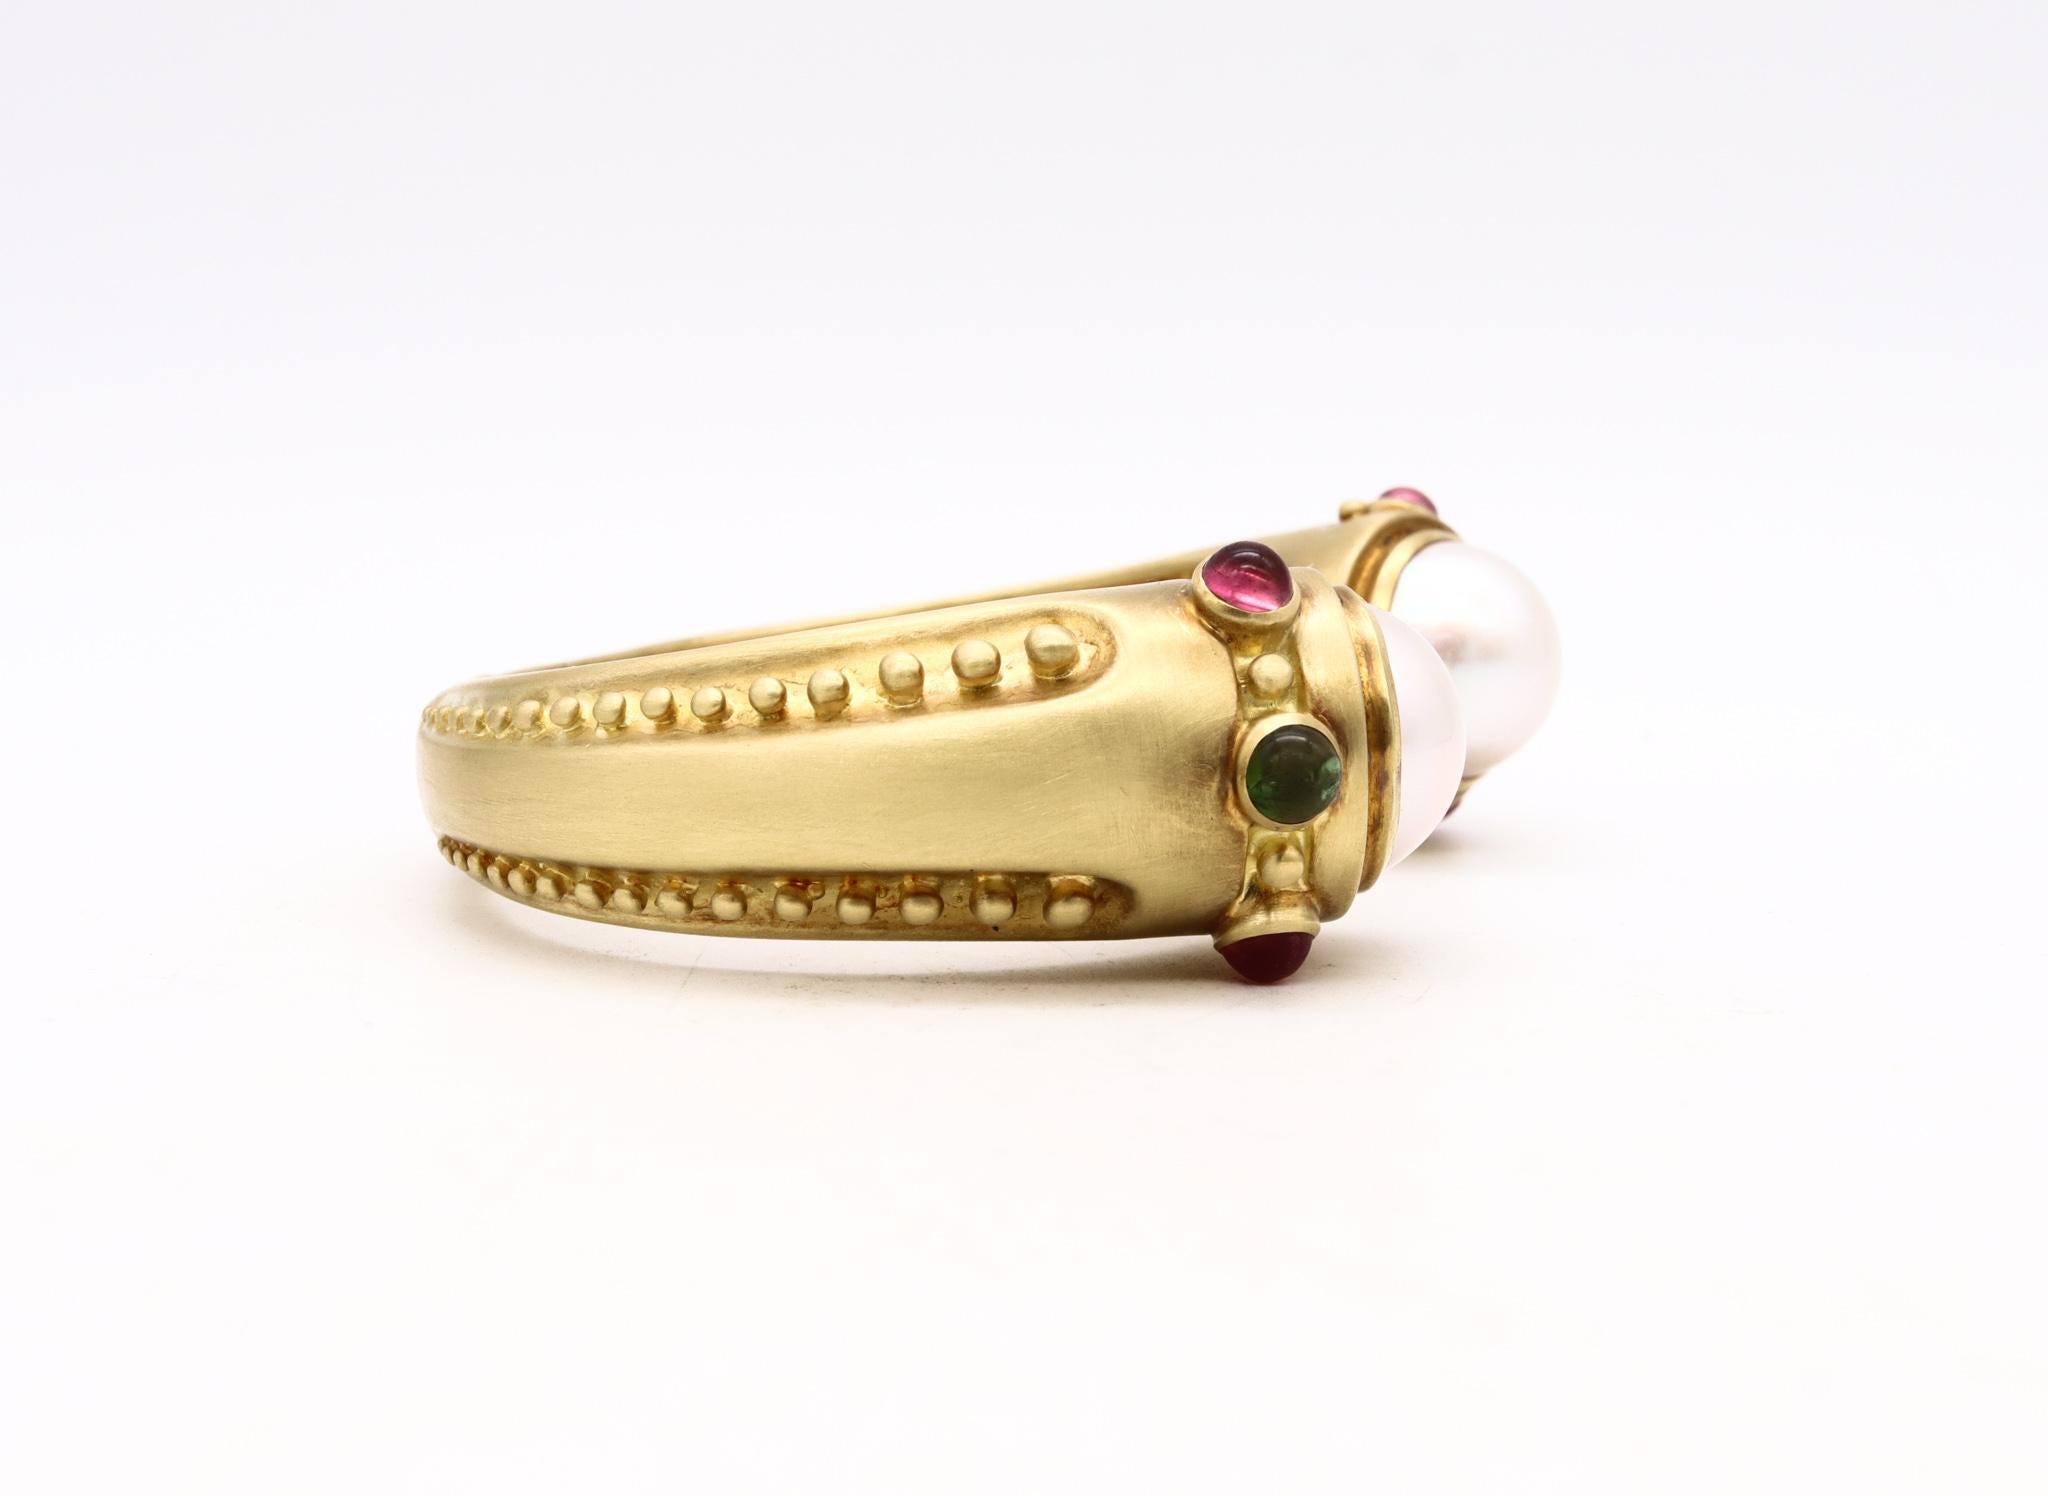 Marlene Stowe Cuff Bracelet in 18Kt Brushed Gold with Mabe Pearls and Tourmaline For Sale 1